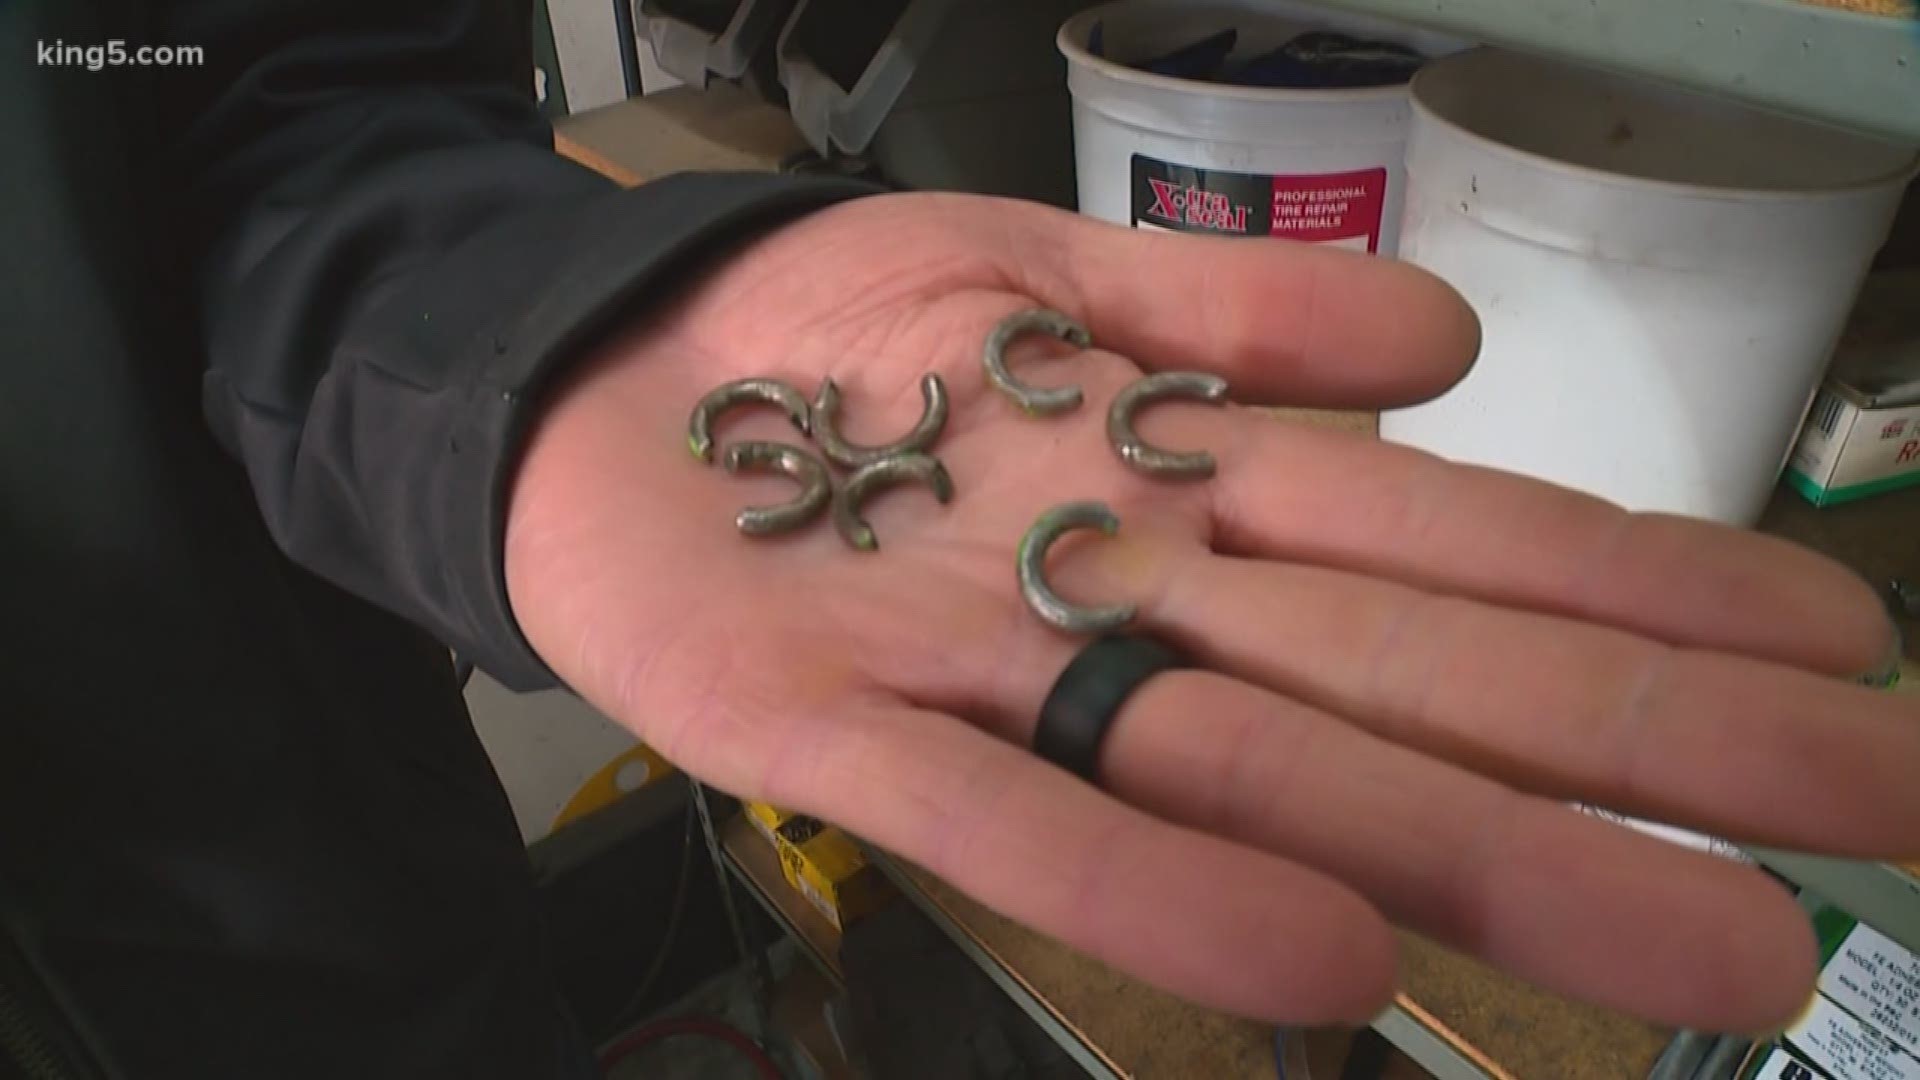 Tire repair shops are busy after all the snow and ice we had on our roads. KING 5's Ted Land has been out on the roads today and has more on what he's seeing.